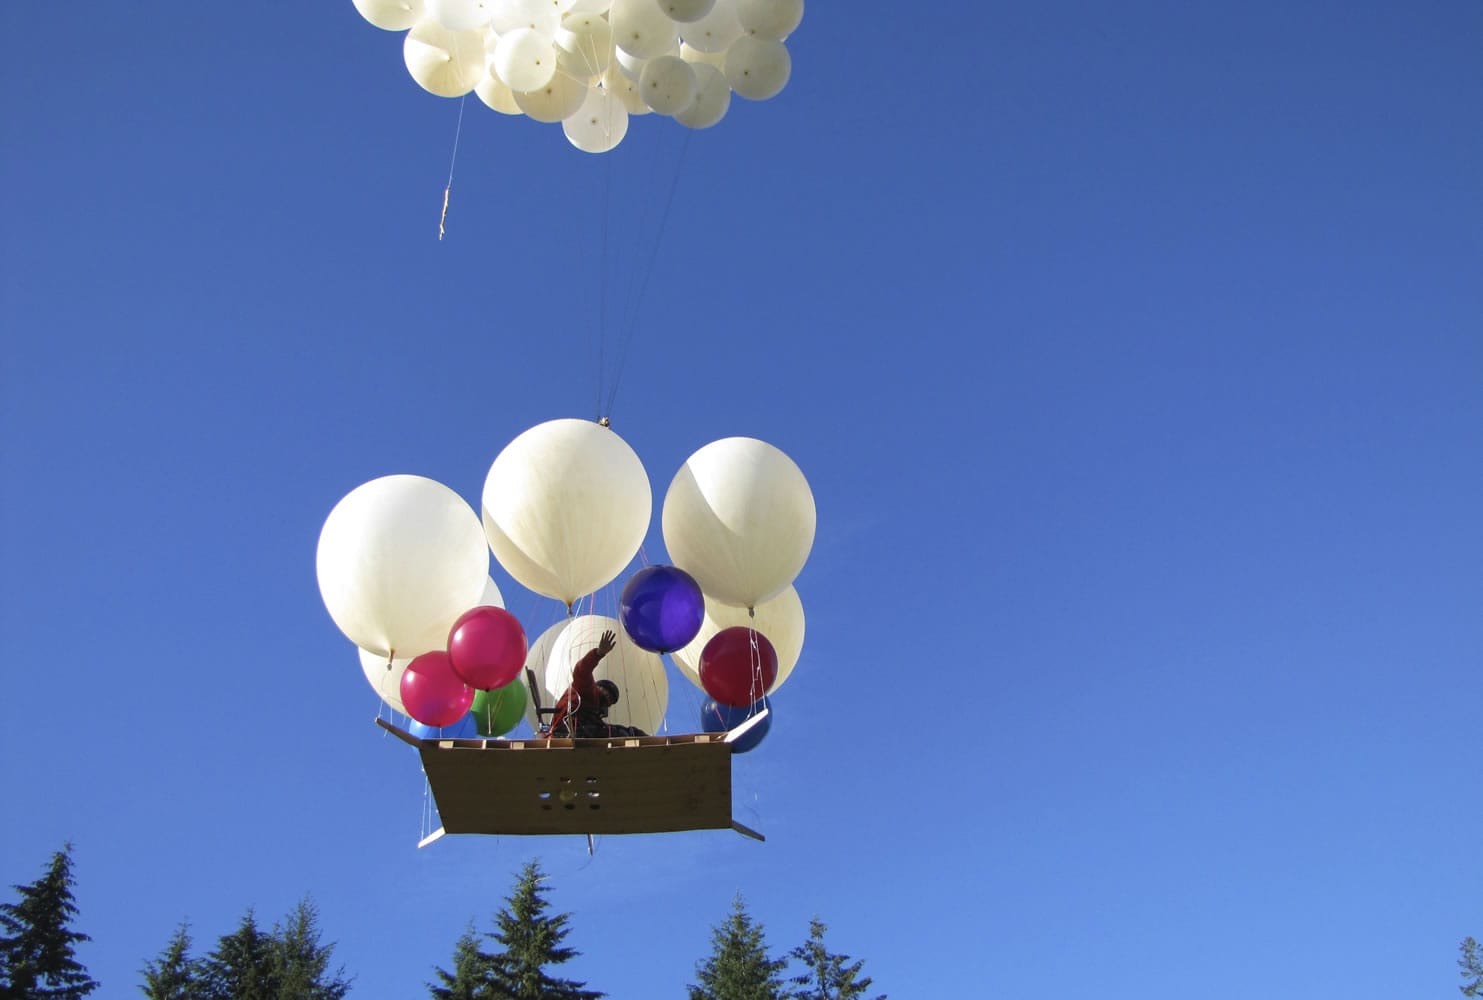 Update Lawnchair Balloonist Touches Down East Of Sunset Falls The Columbian